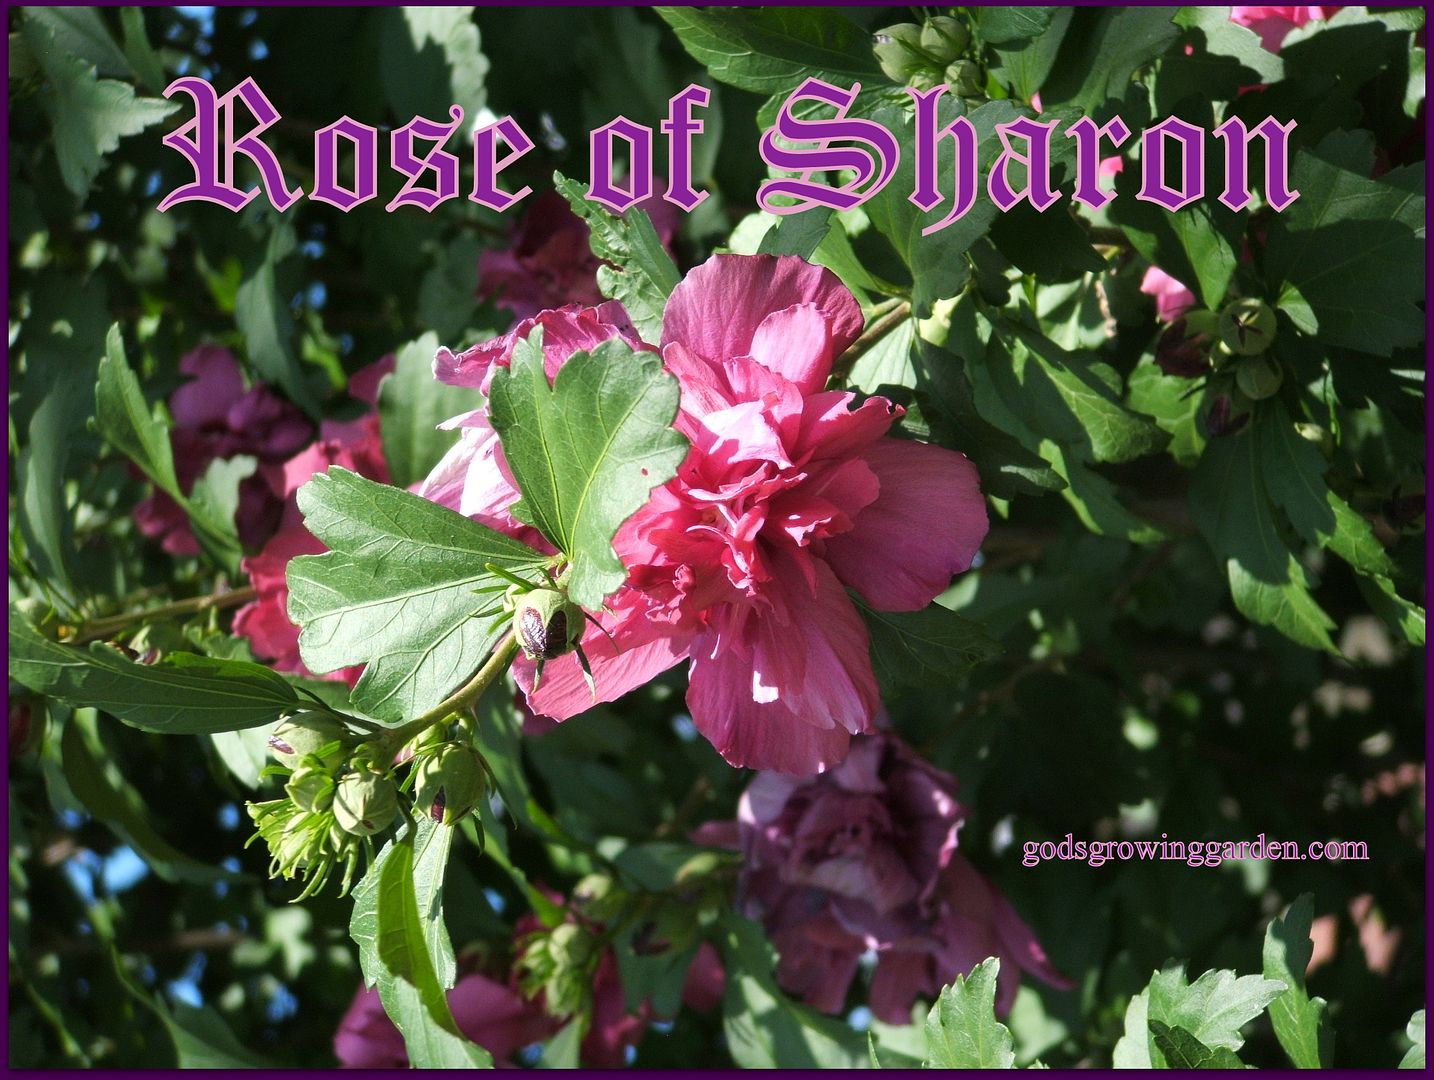 Rose of Sharon by Angie Ouellette-Tower for godsgrowinggarden.com photo 004_zpsdff6c2ee.jpg